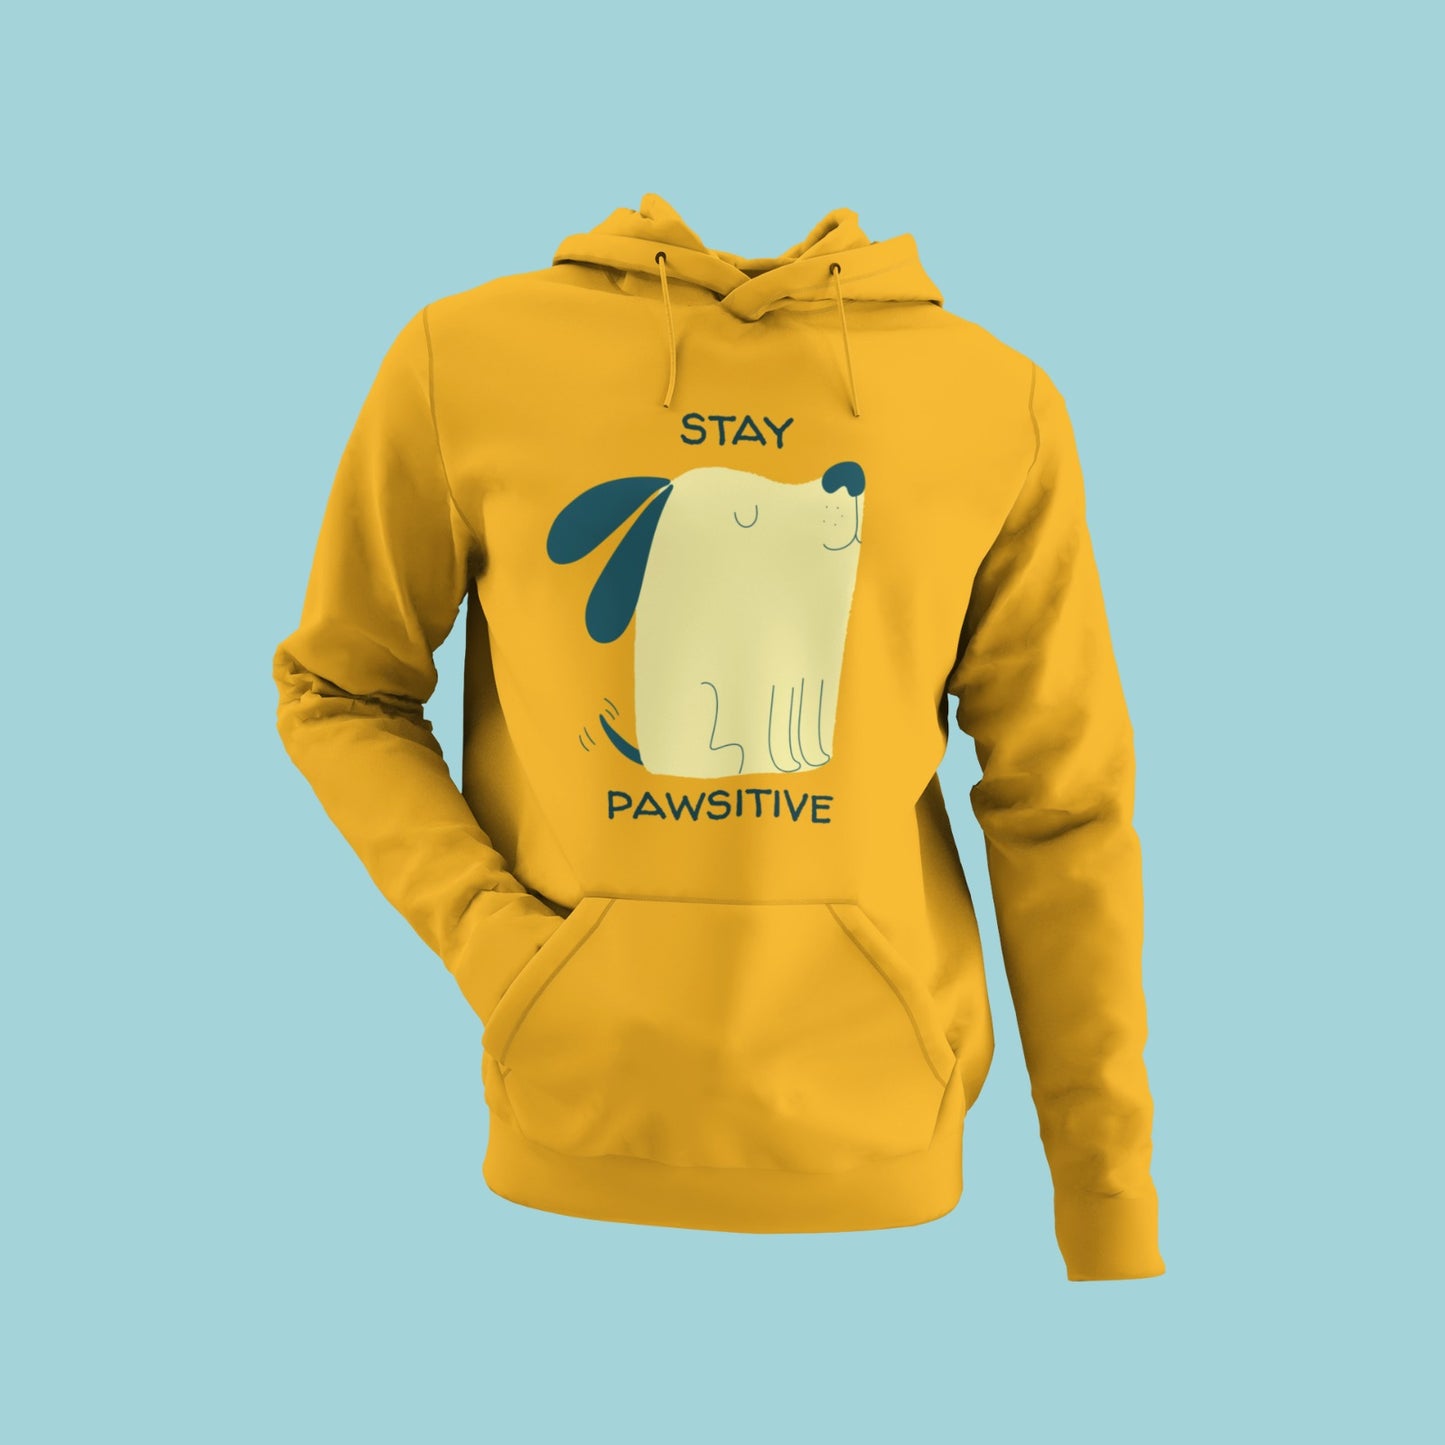 Brighten up your wardrobe with our yellow "Stay Pawsitive" hoodie! Featuring a cute sitting dog caricature and a positive message, this hoodie is the perfect way to add some sunshine to your day. Stay cozy and optimistic in our comfortable and stylish design.